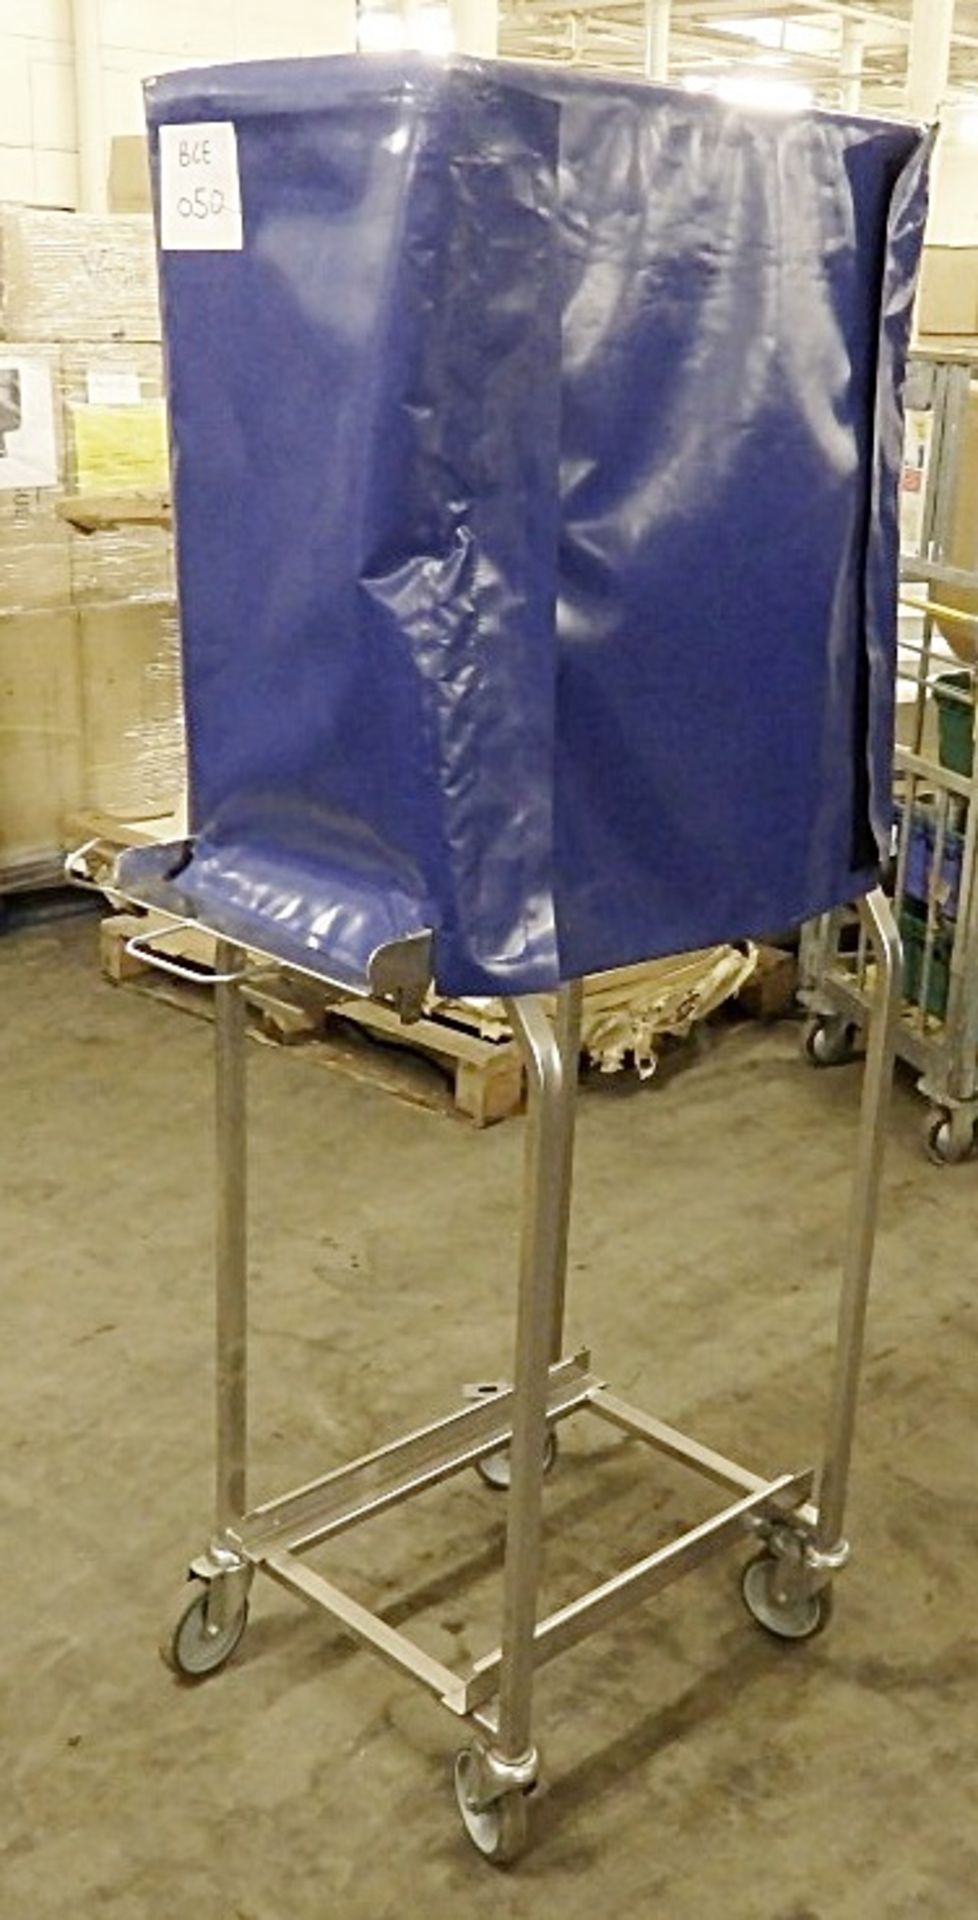 1 x Stainless Steel Plate Rack / Trolley With Thermal Cover -  Only Used Once Before - 31 Plate - Image 7 of 7